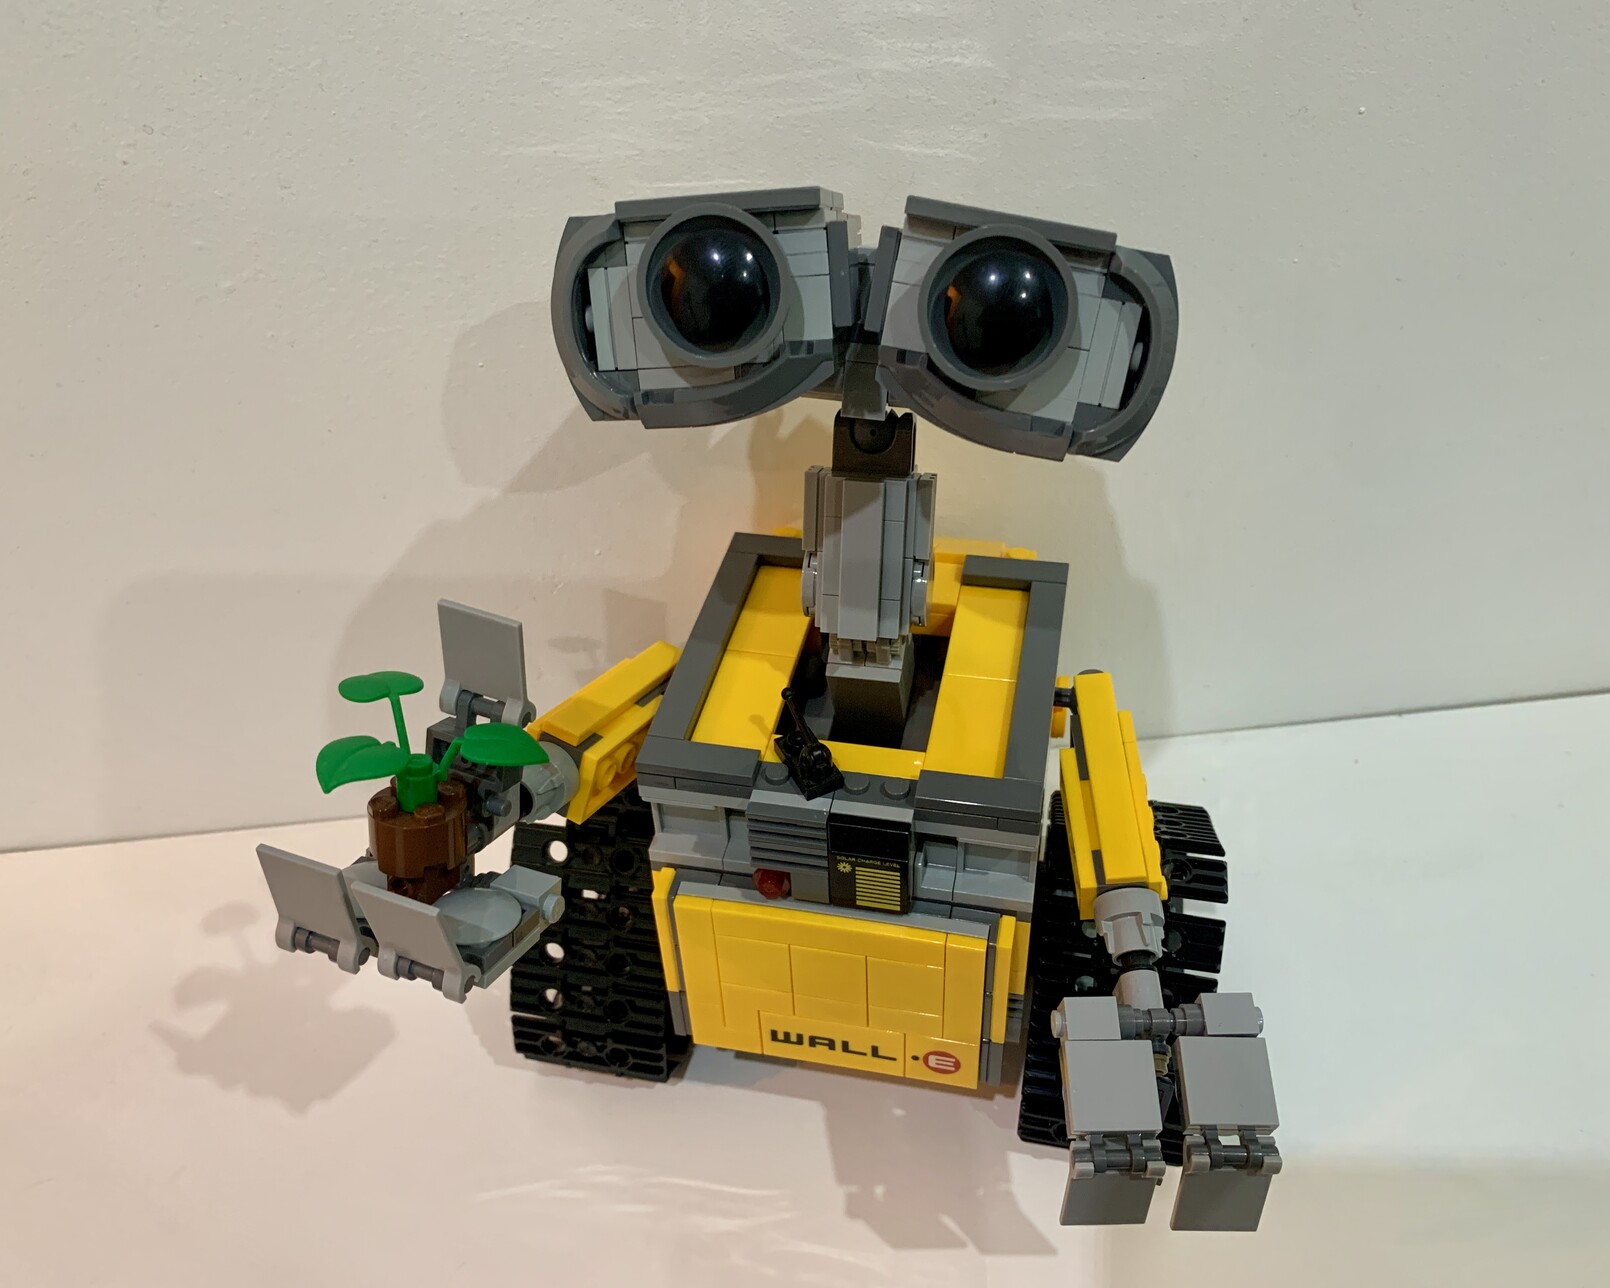 Built Lego Wall·E robot from the Pixar film looking at the camera and holding a plant in his right hand.